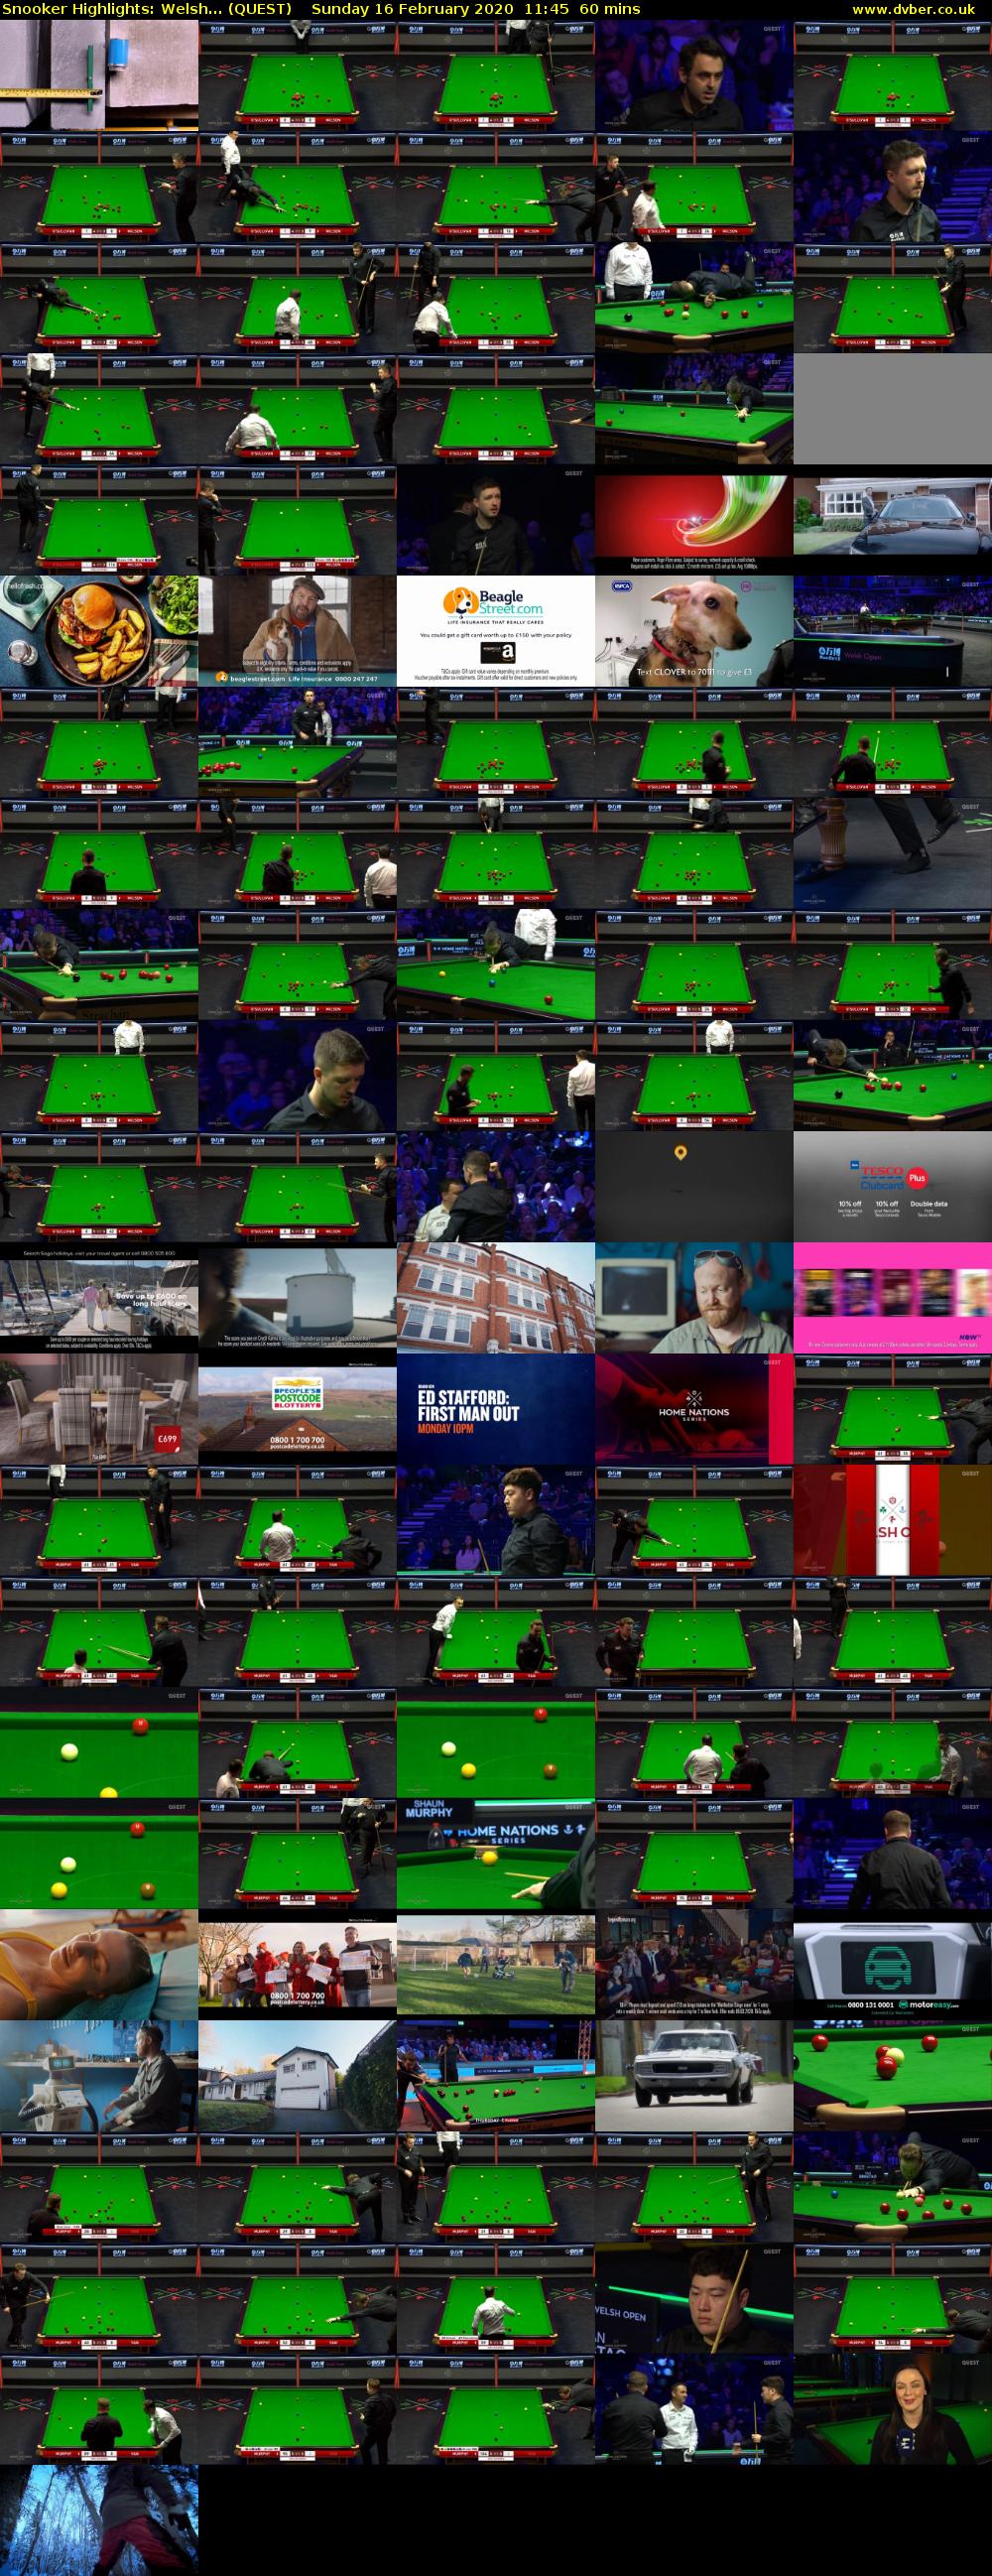 Snooker Highlights: Welsh... (QUEST) Sunday 16 February 2020 11:45 - 12:45